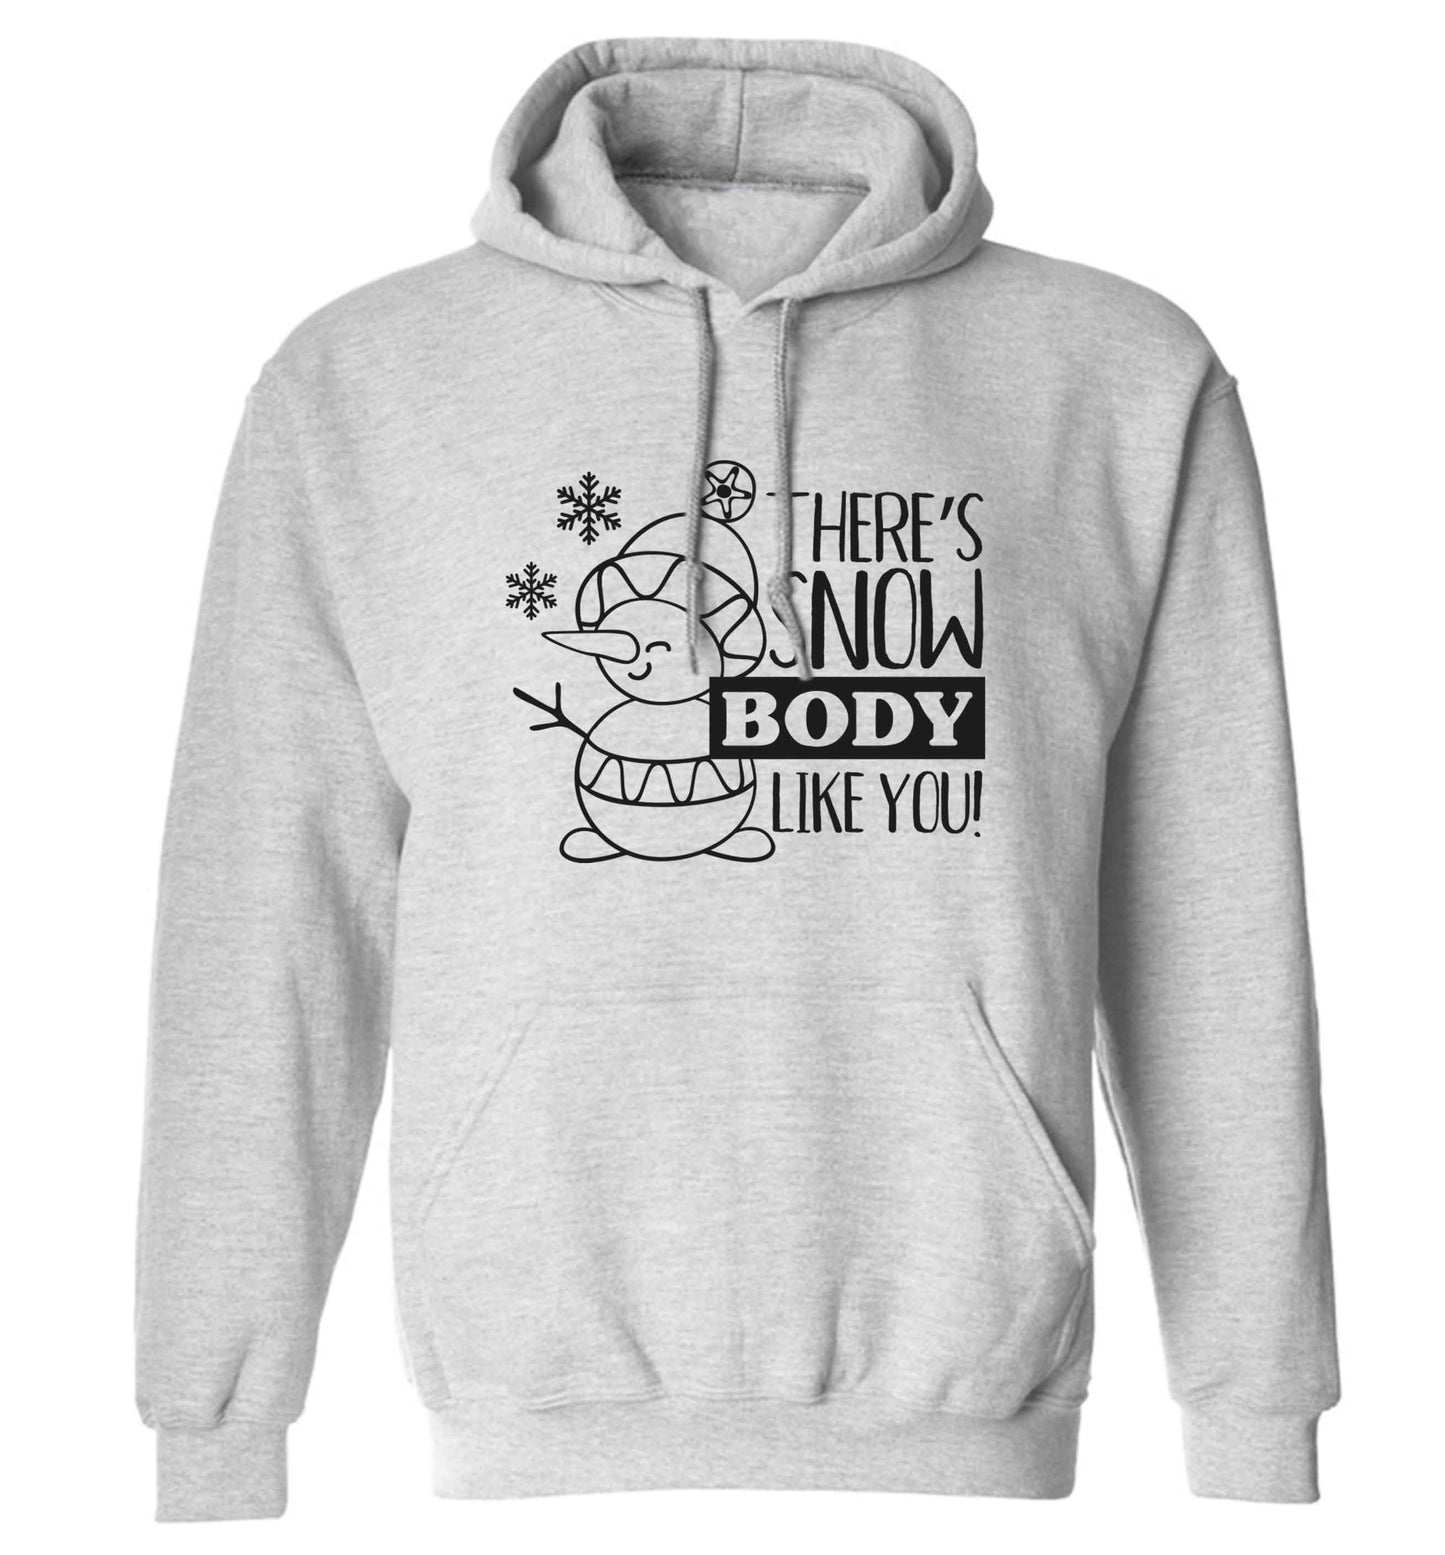 There's snow body like you adults unisex grey hoodie 2XL